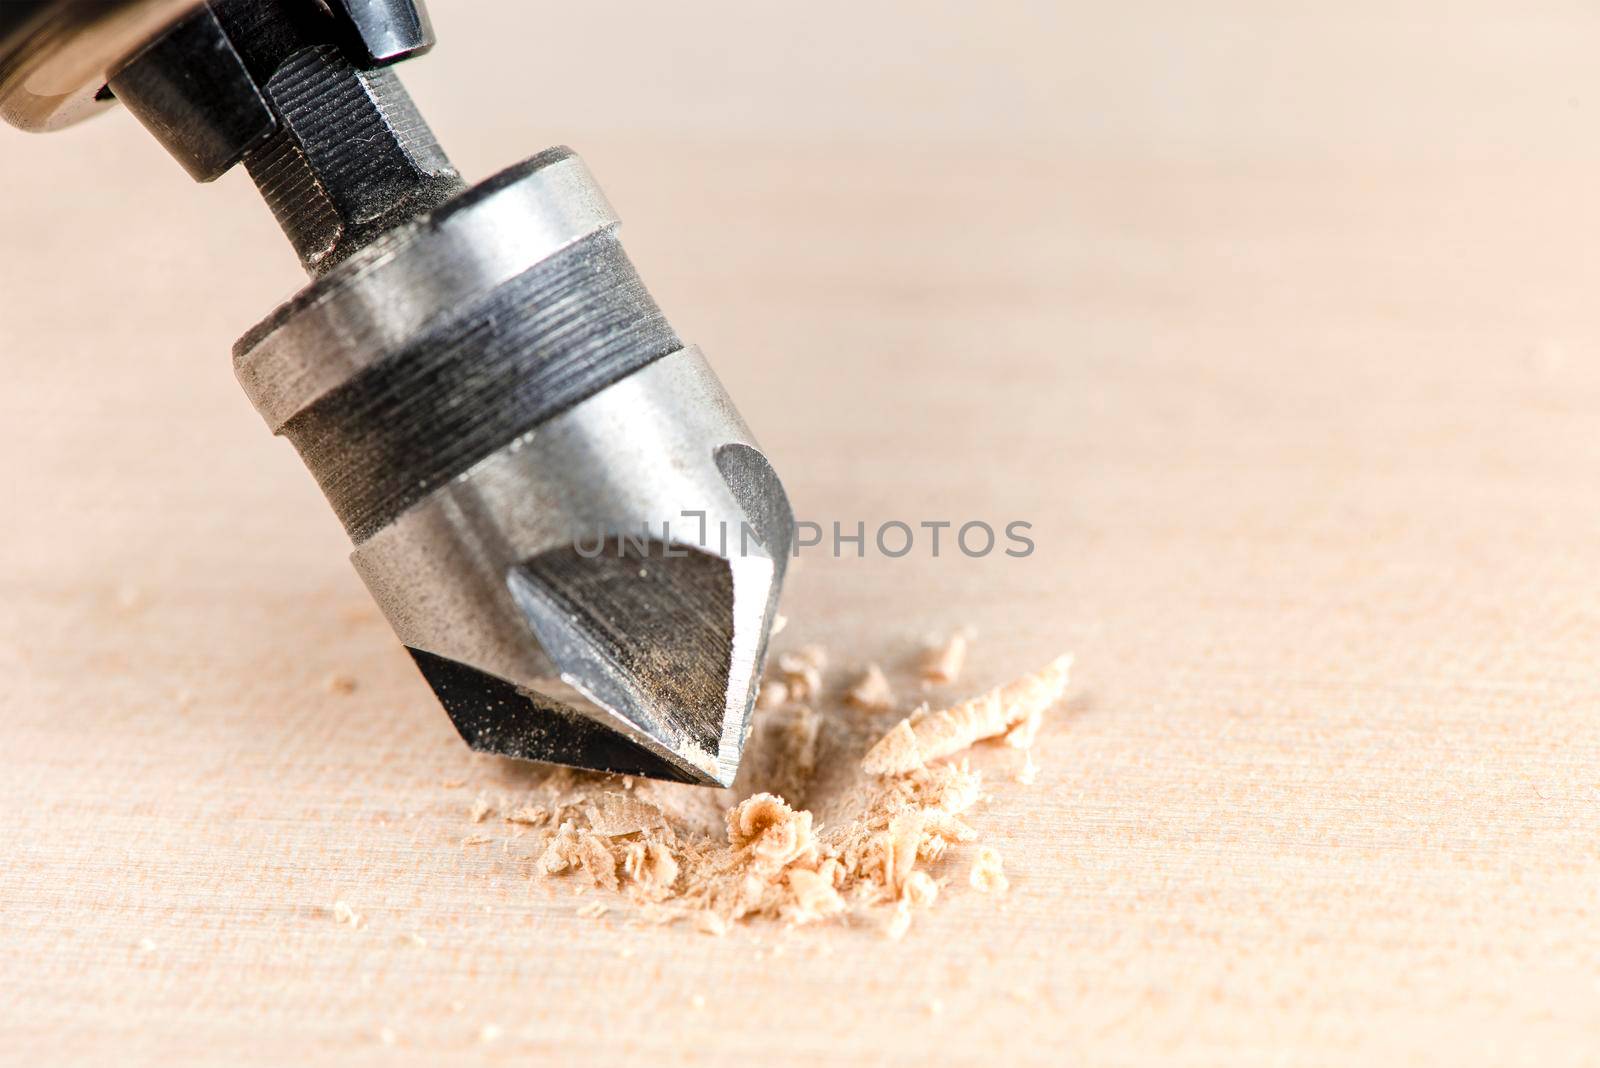 Countersink for deepening the self-tapping screw. A countersink drill makes a recess in a hole for a screw in a wooden board. by SERSOL